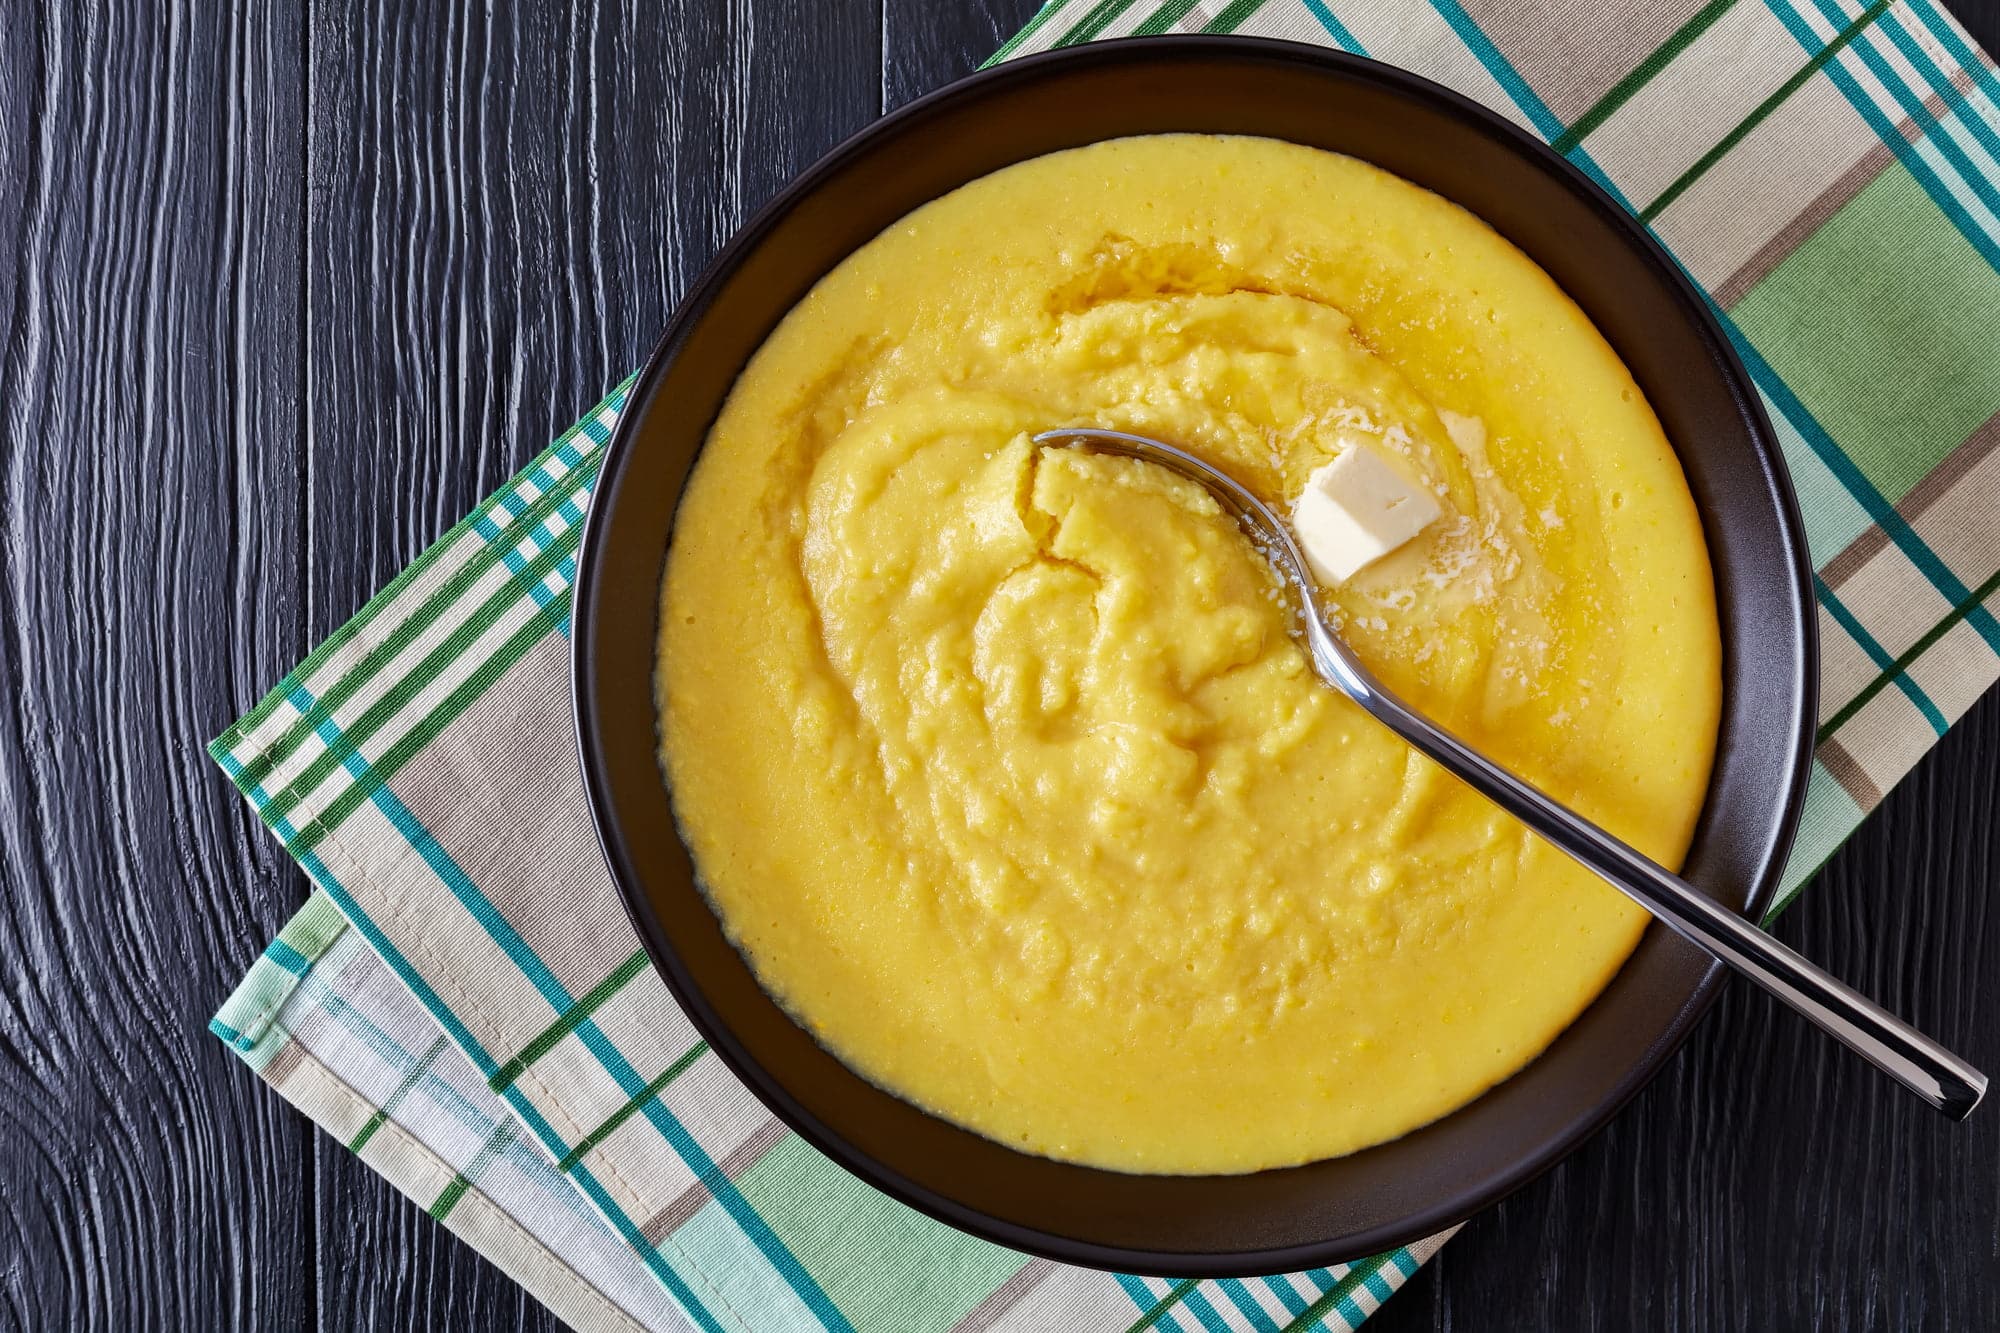 hot cornmeal polenta with melting butter in a bowl with napkin and silver spoon on a black wooden table, horizontal view from above